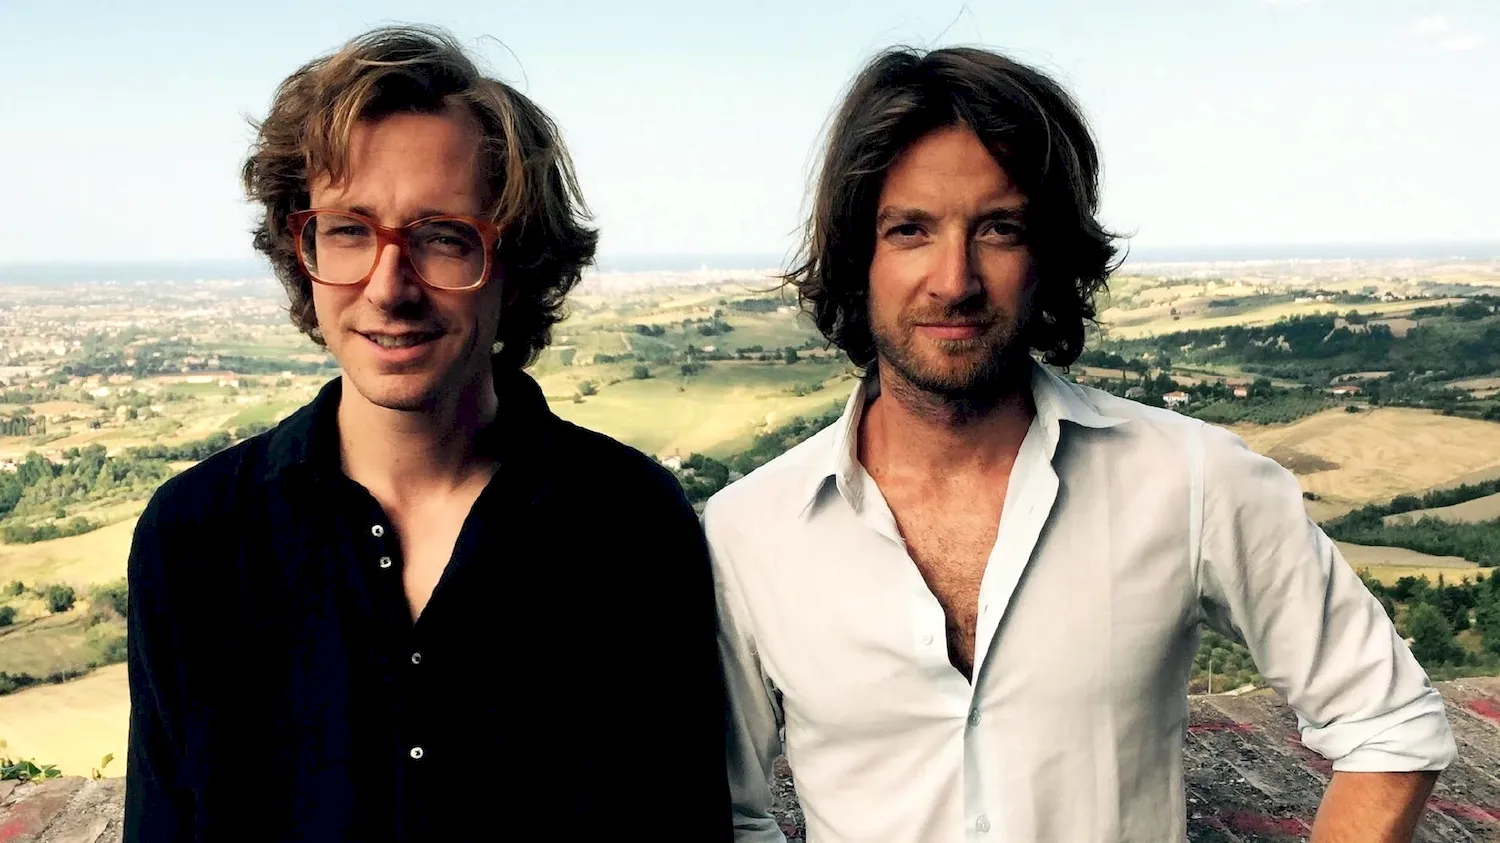 Kings of convenience 2021